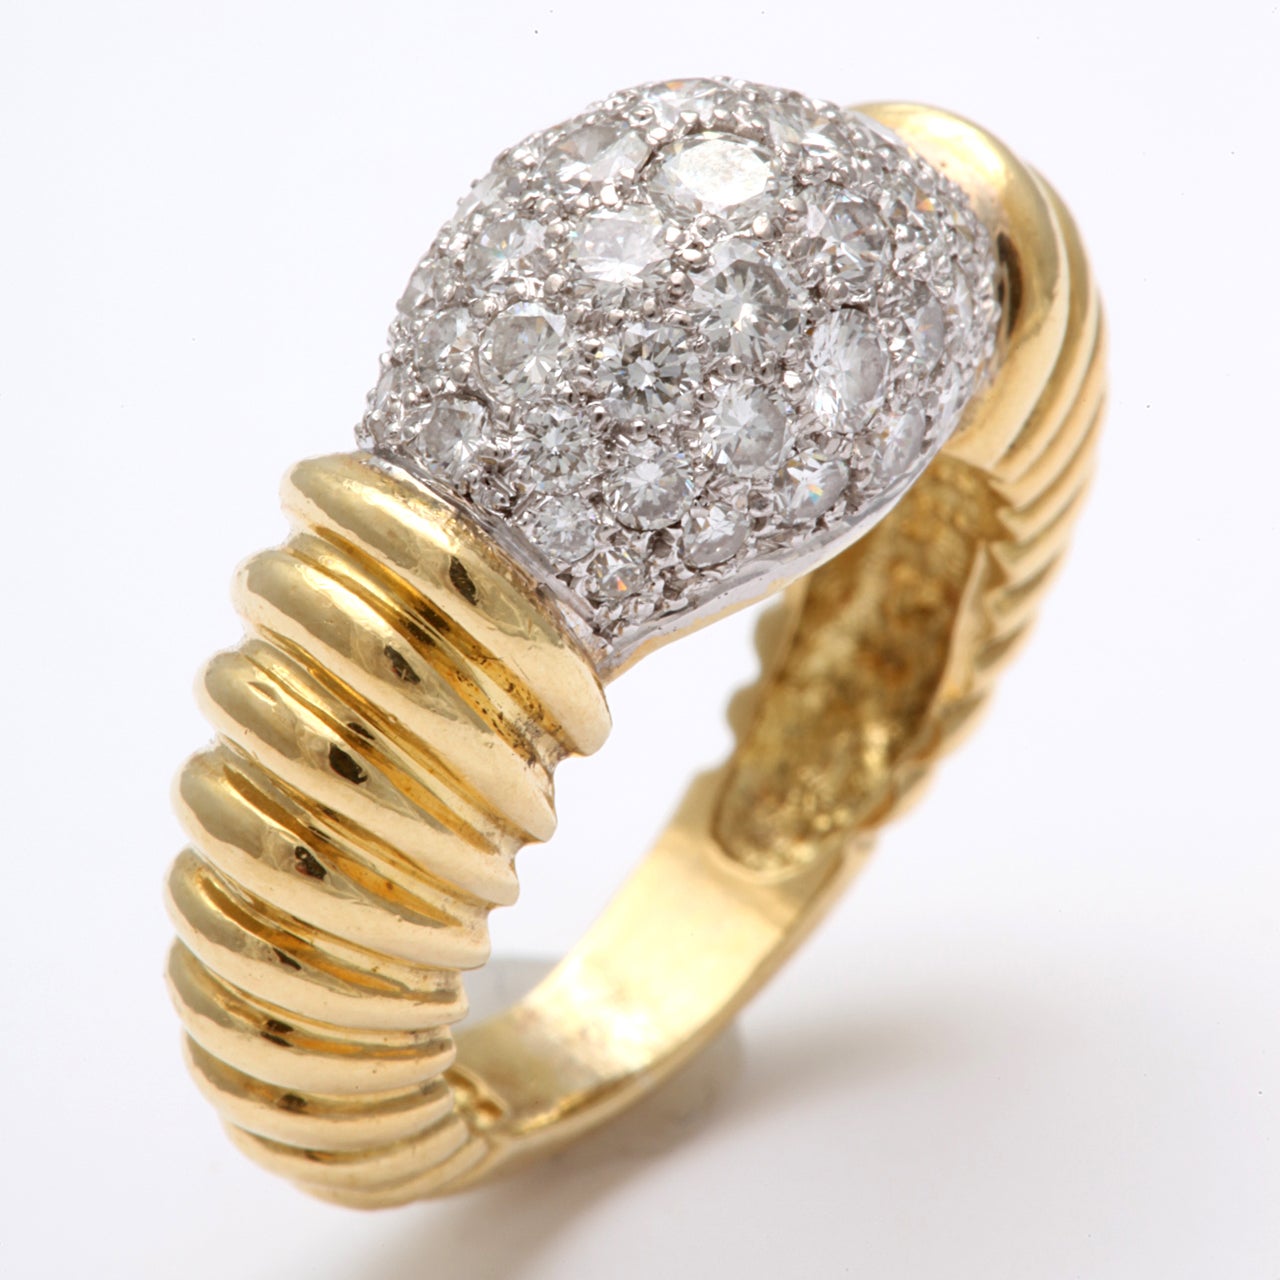 18kt Yellow Gold graduated ribbed ring with center Dome pave set in Platinum with full cut - clean & white Diamonds. Size 5 1/2, but can be sized.